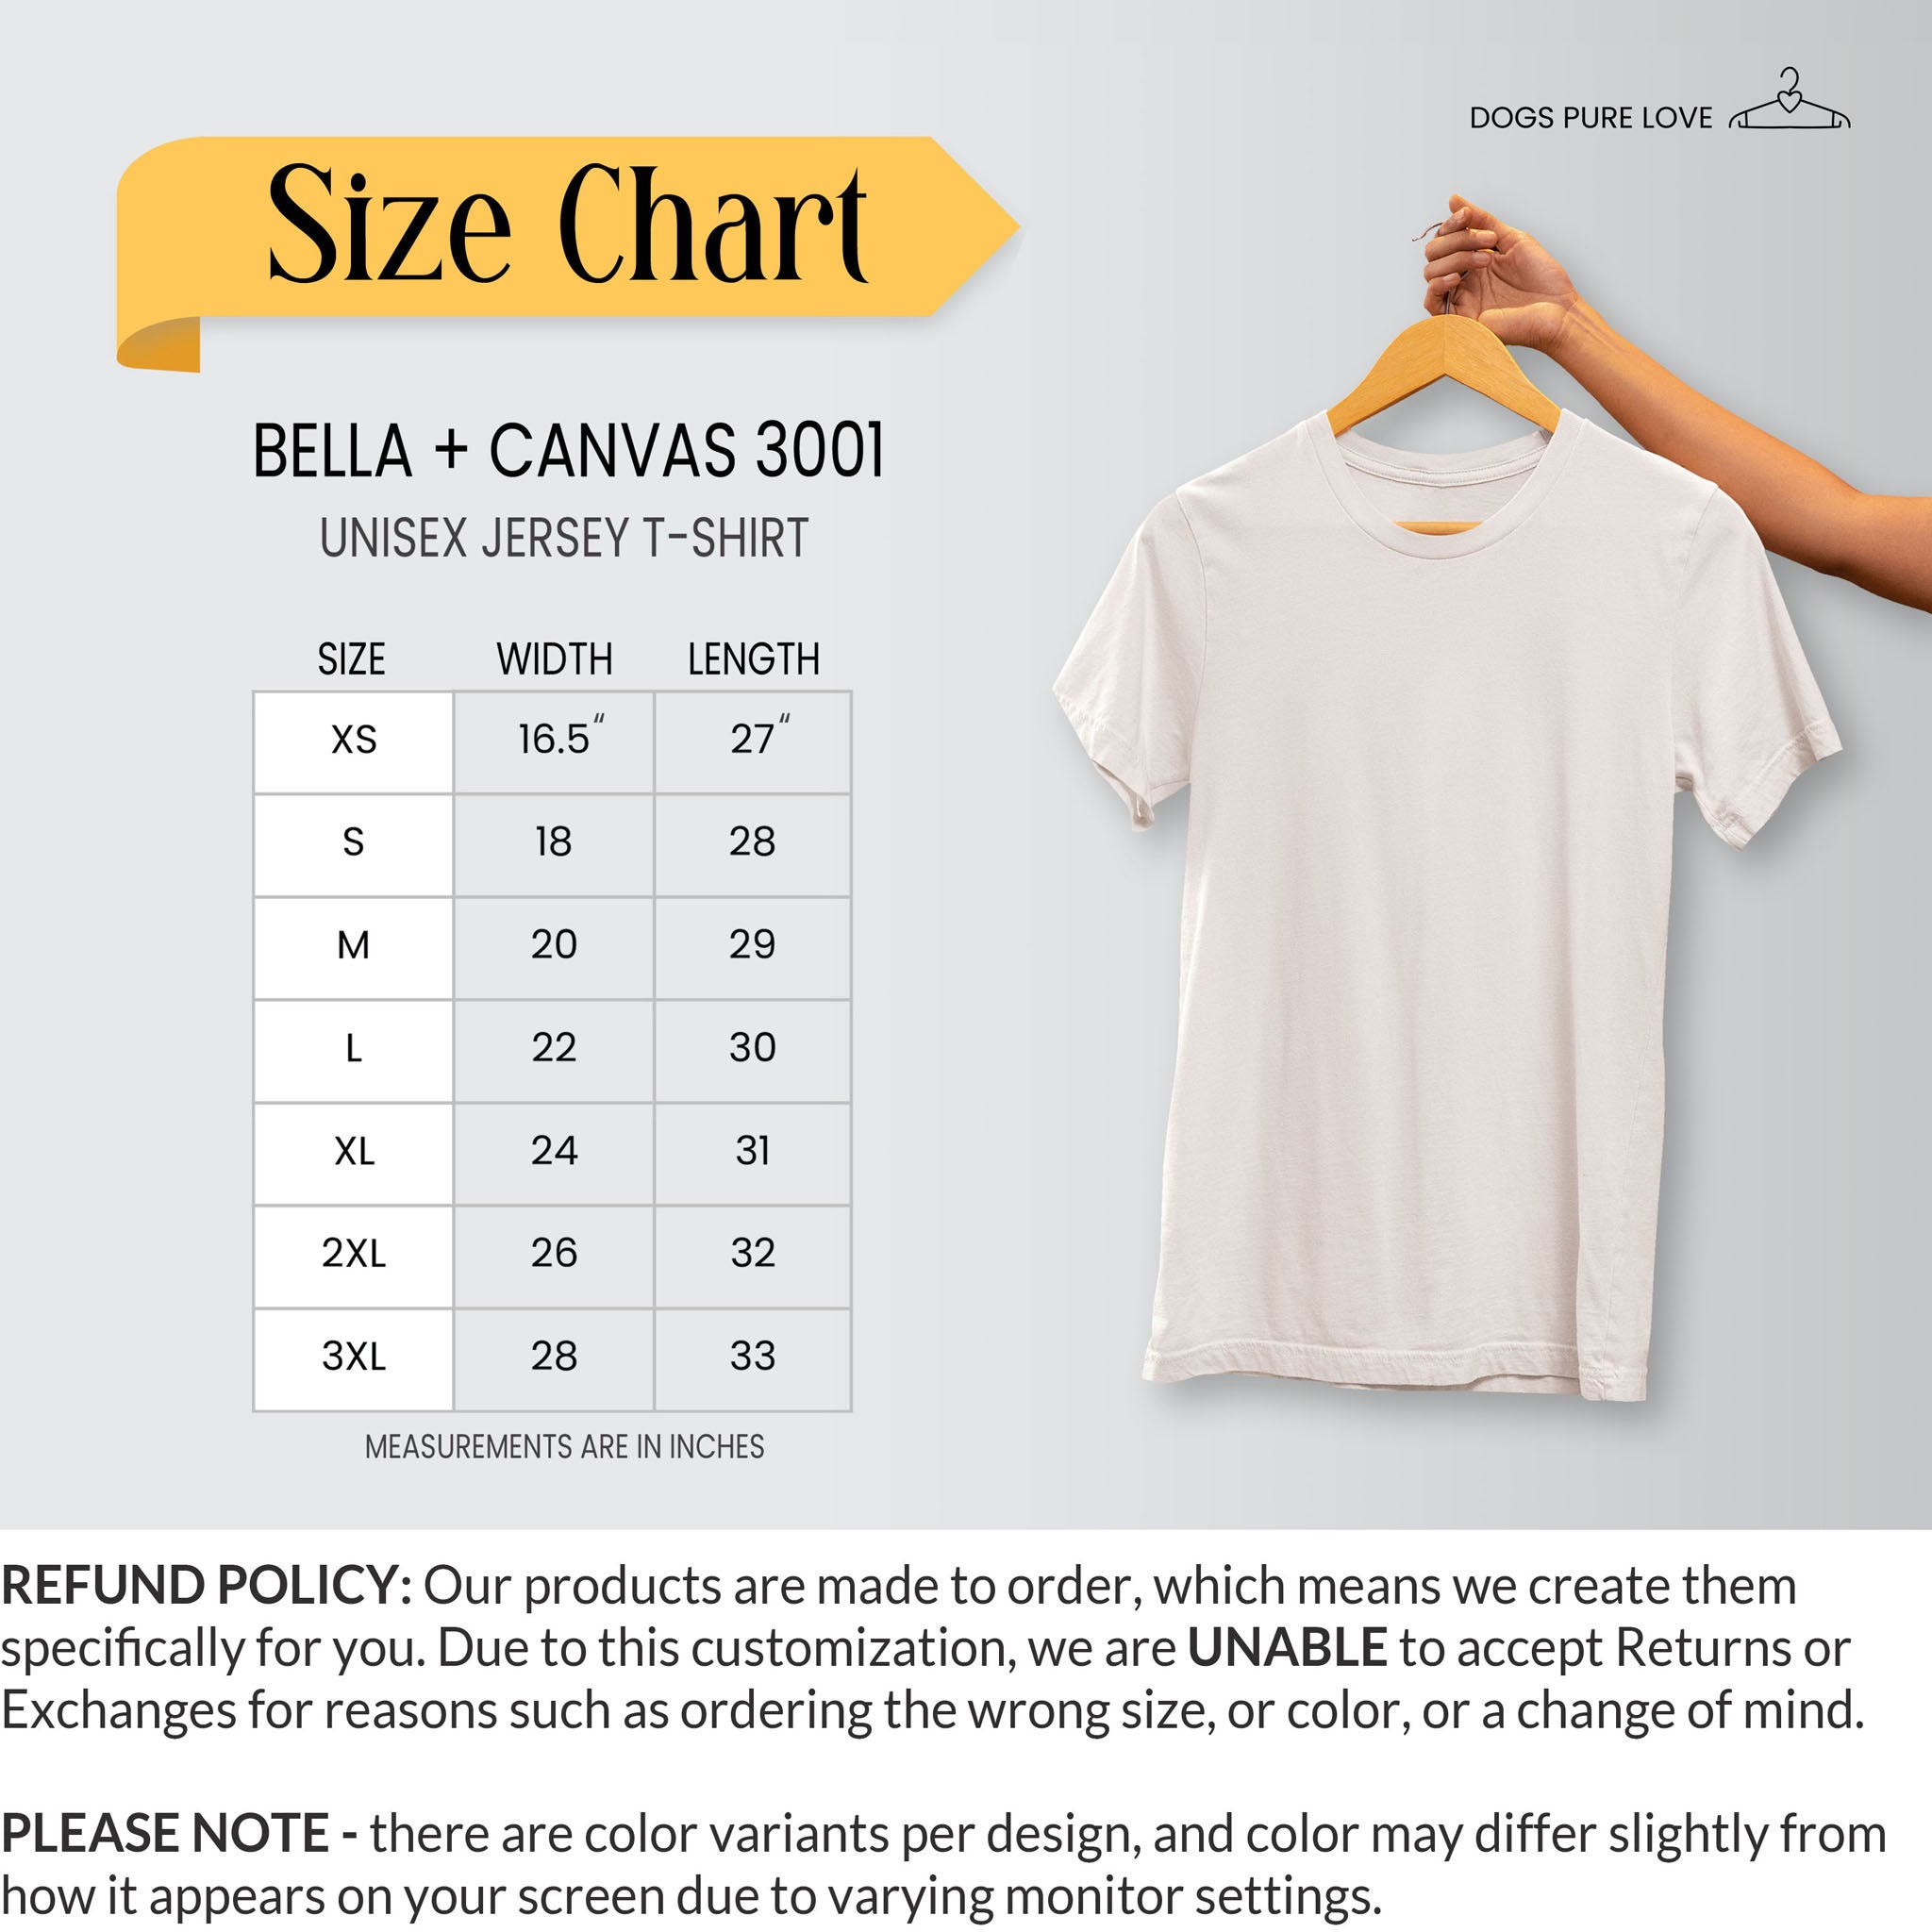 A T-Shirt Size Chart by Dogs Pure Love displays measurements and a short Refund Policy description.